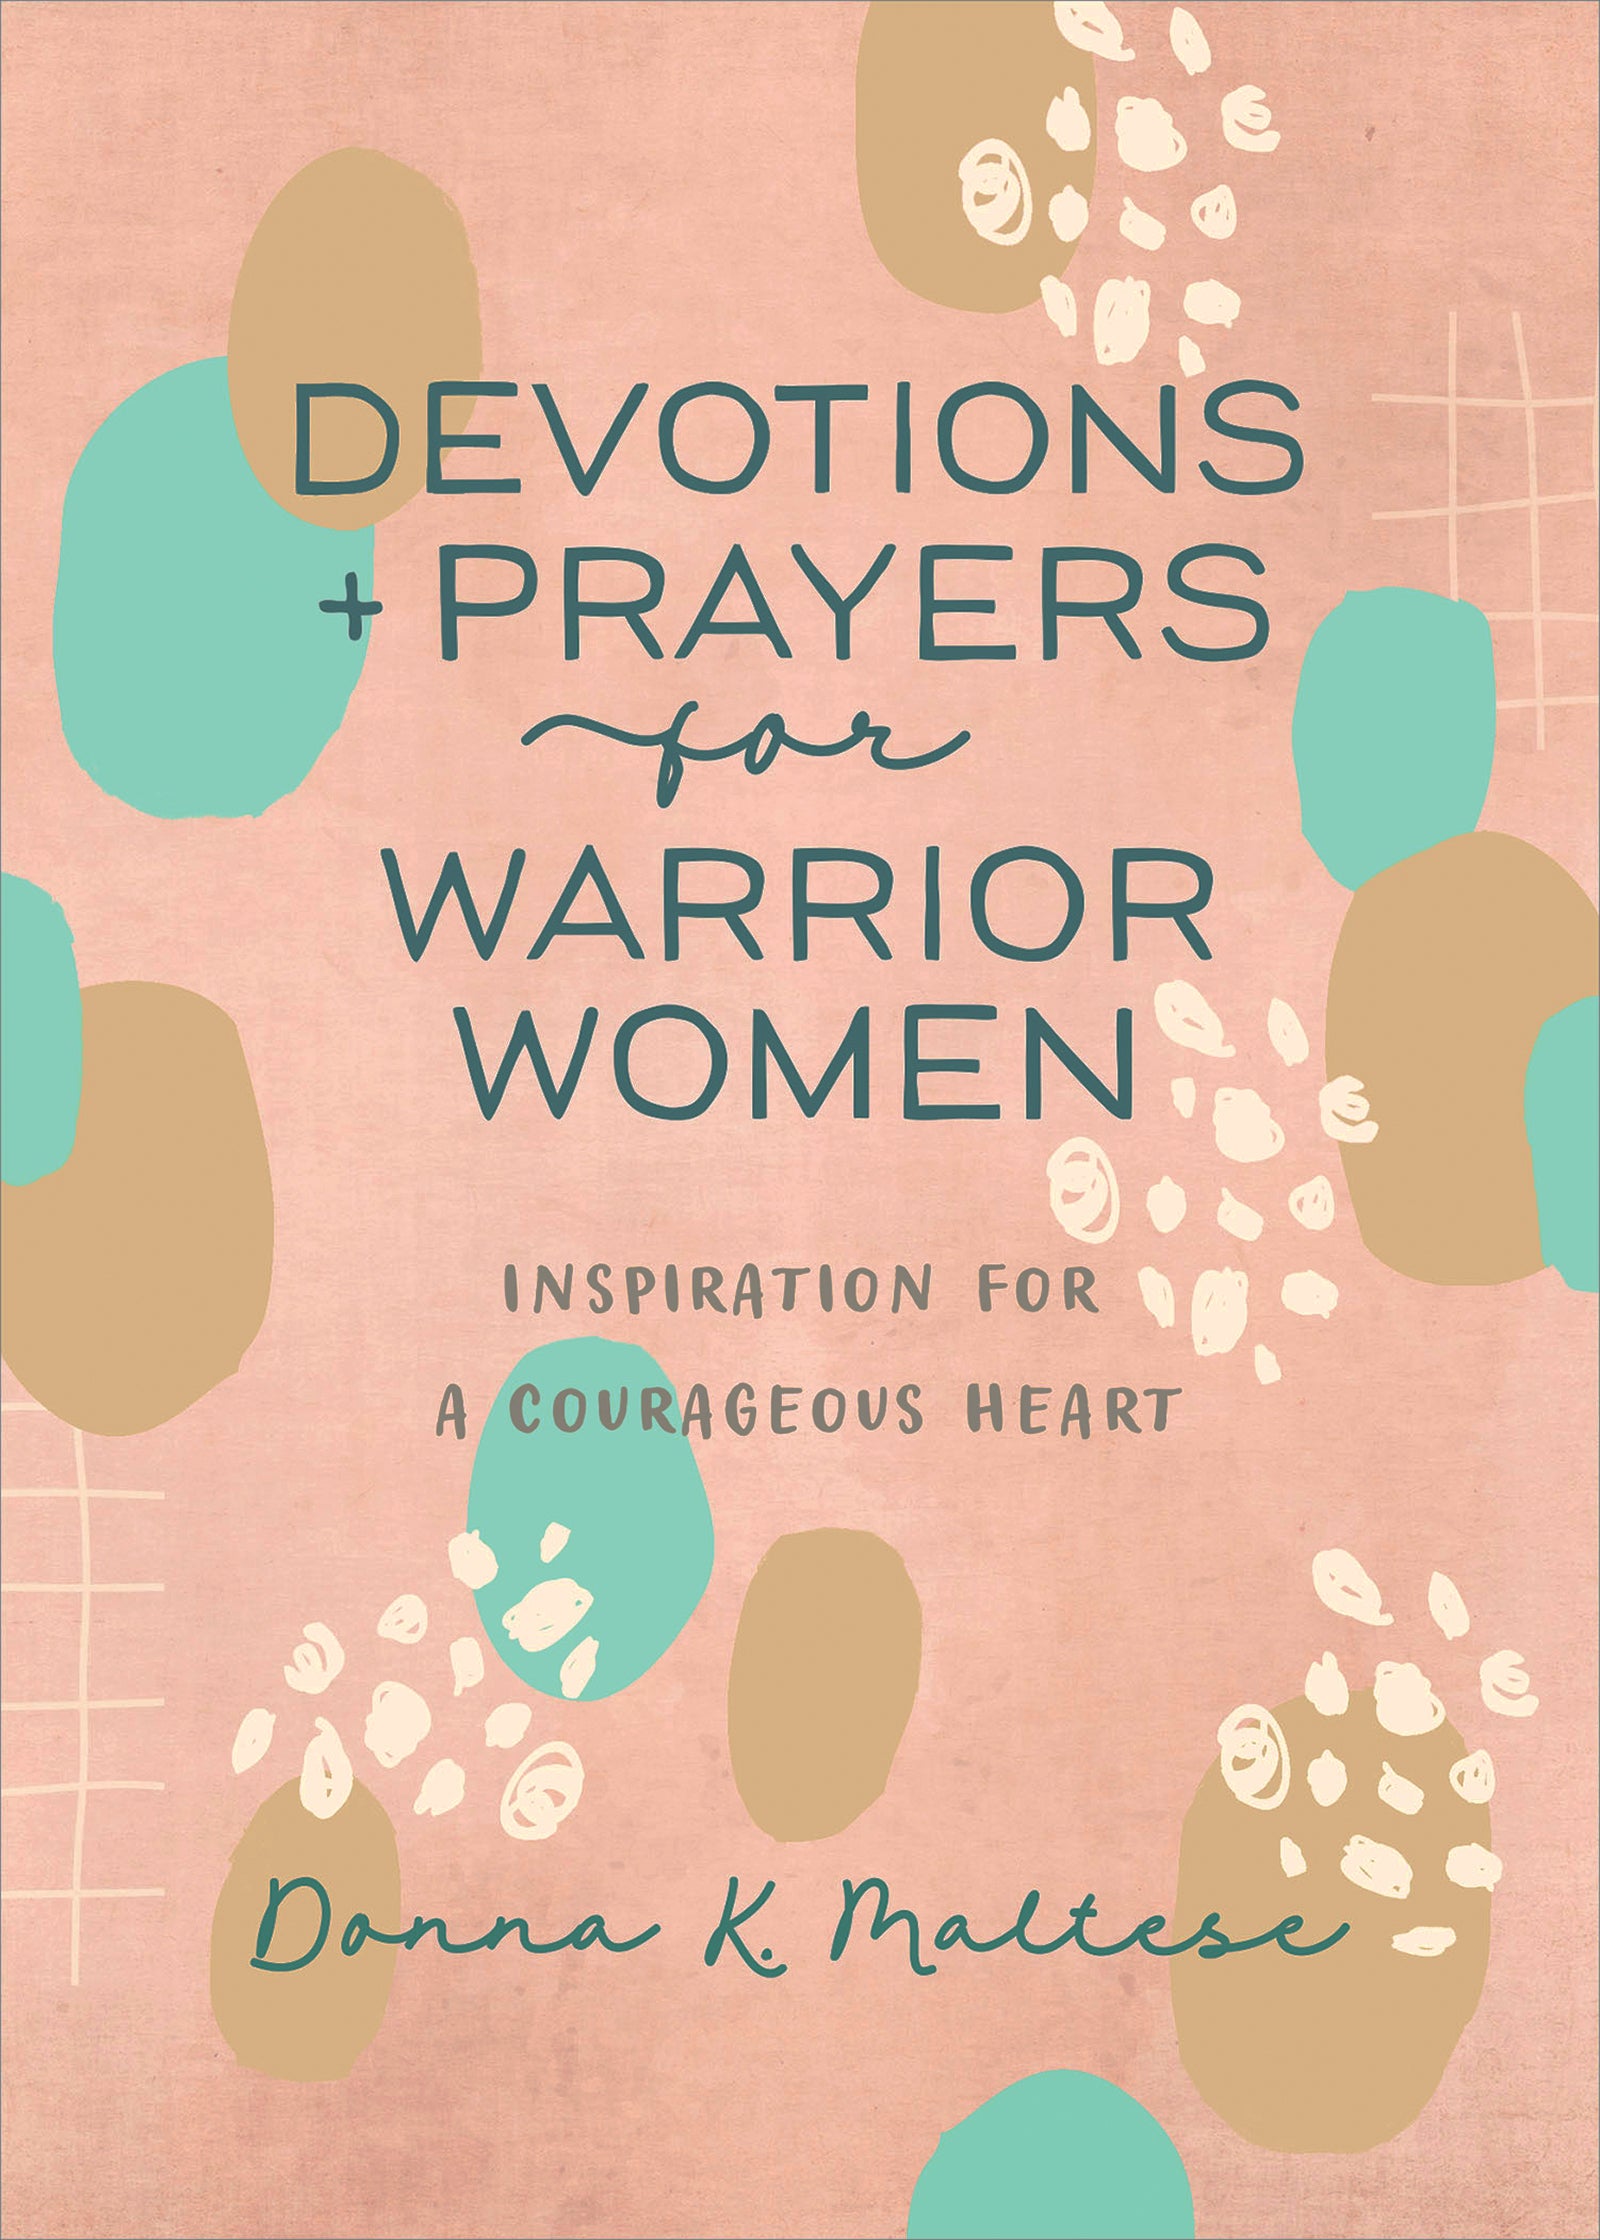 Devotions and Prayers for Warrior Women - The Christian Gift Company